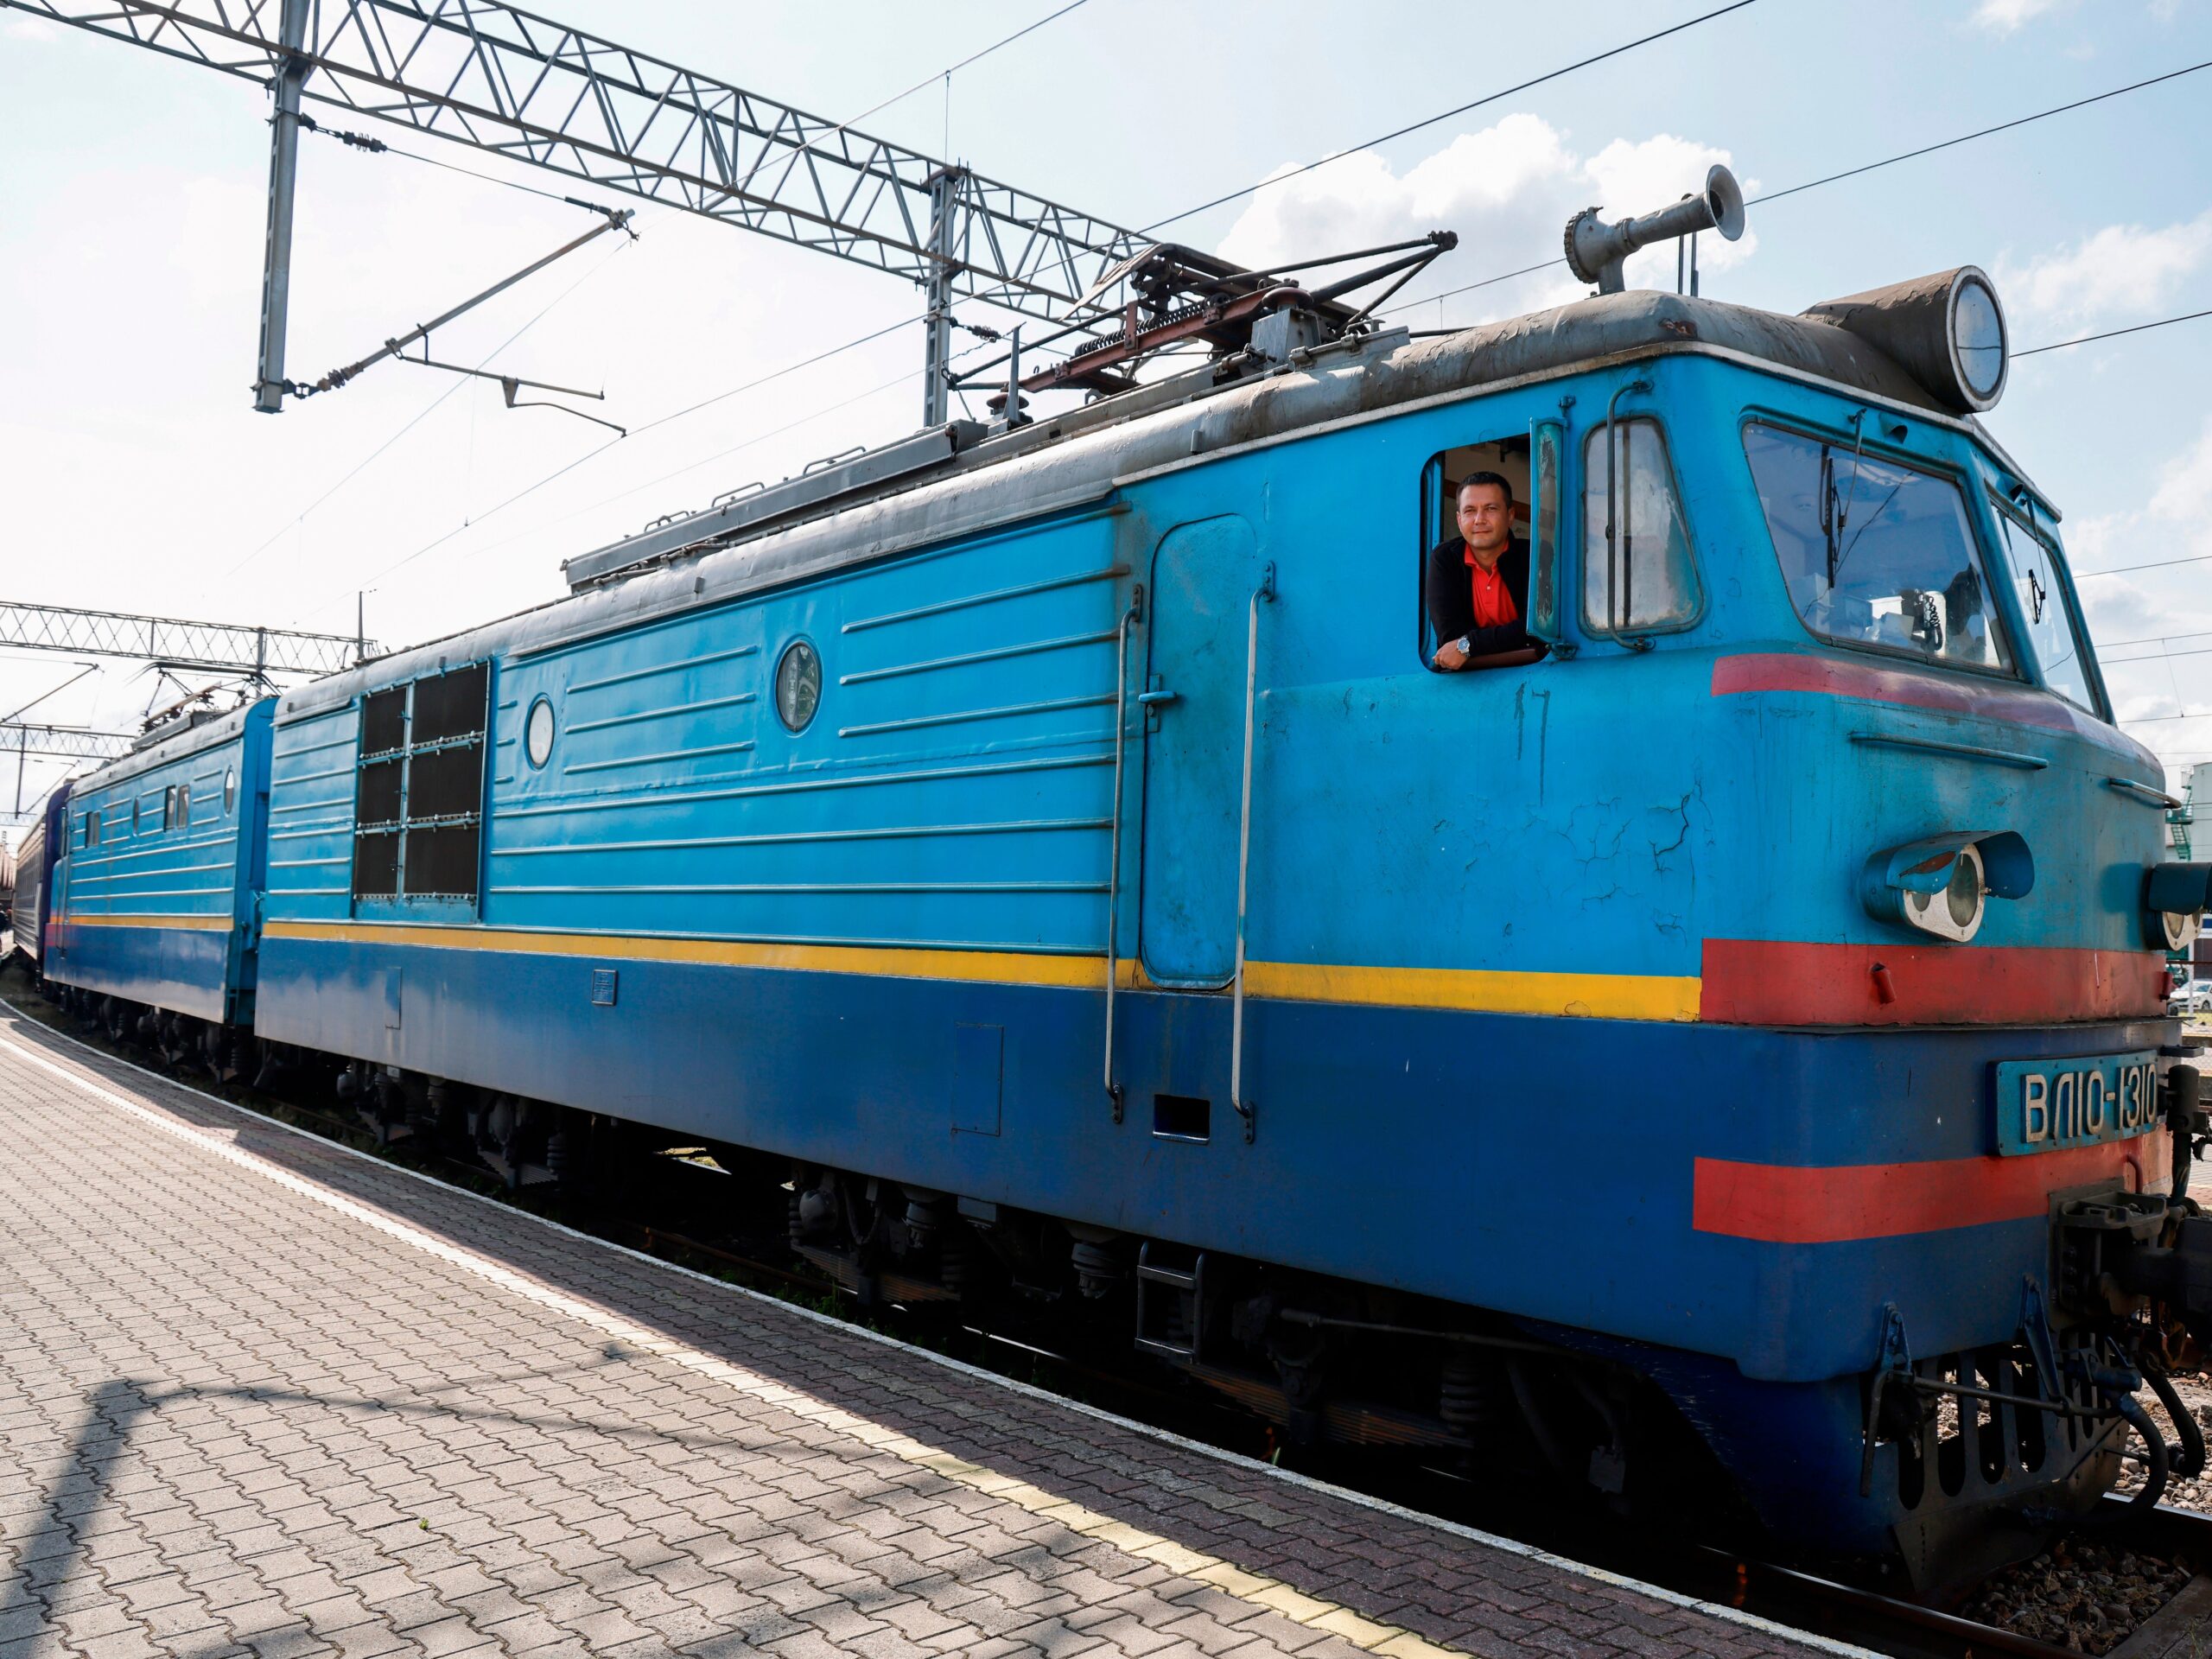 Train driver Vasyl poses in his train at Przemysl train station, Poland in June after driving the heads of state of France, Germany and Italy from Poland to Ukraine and back.